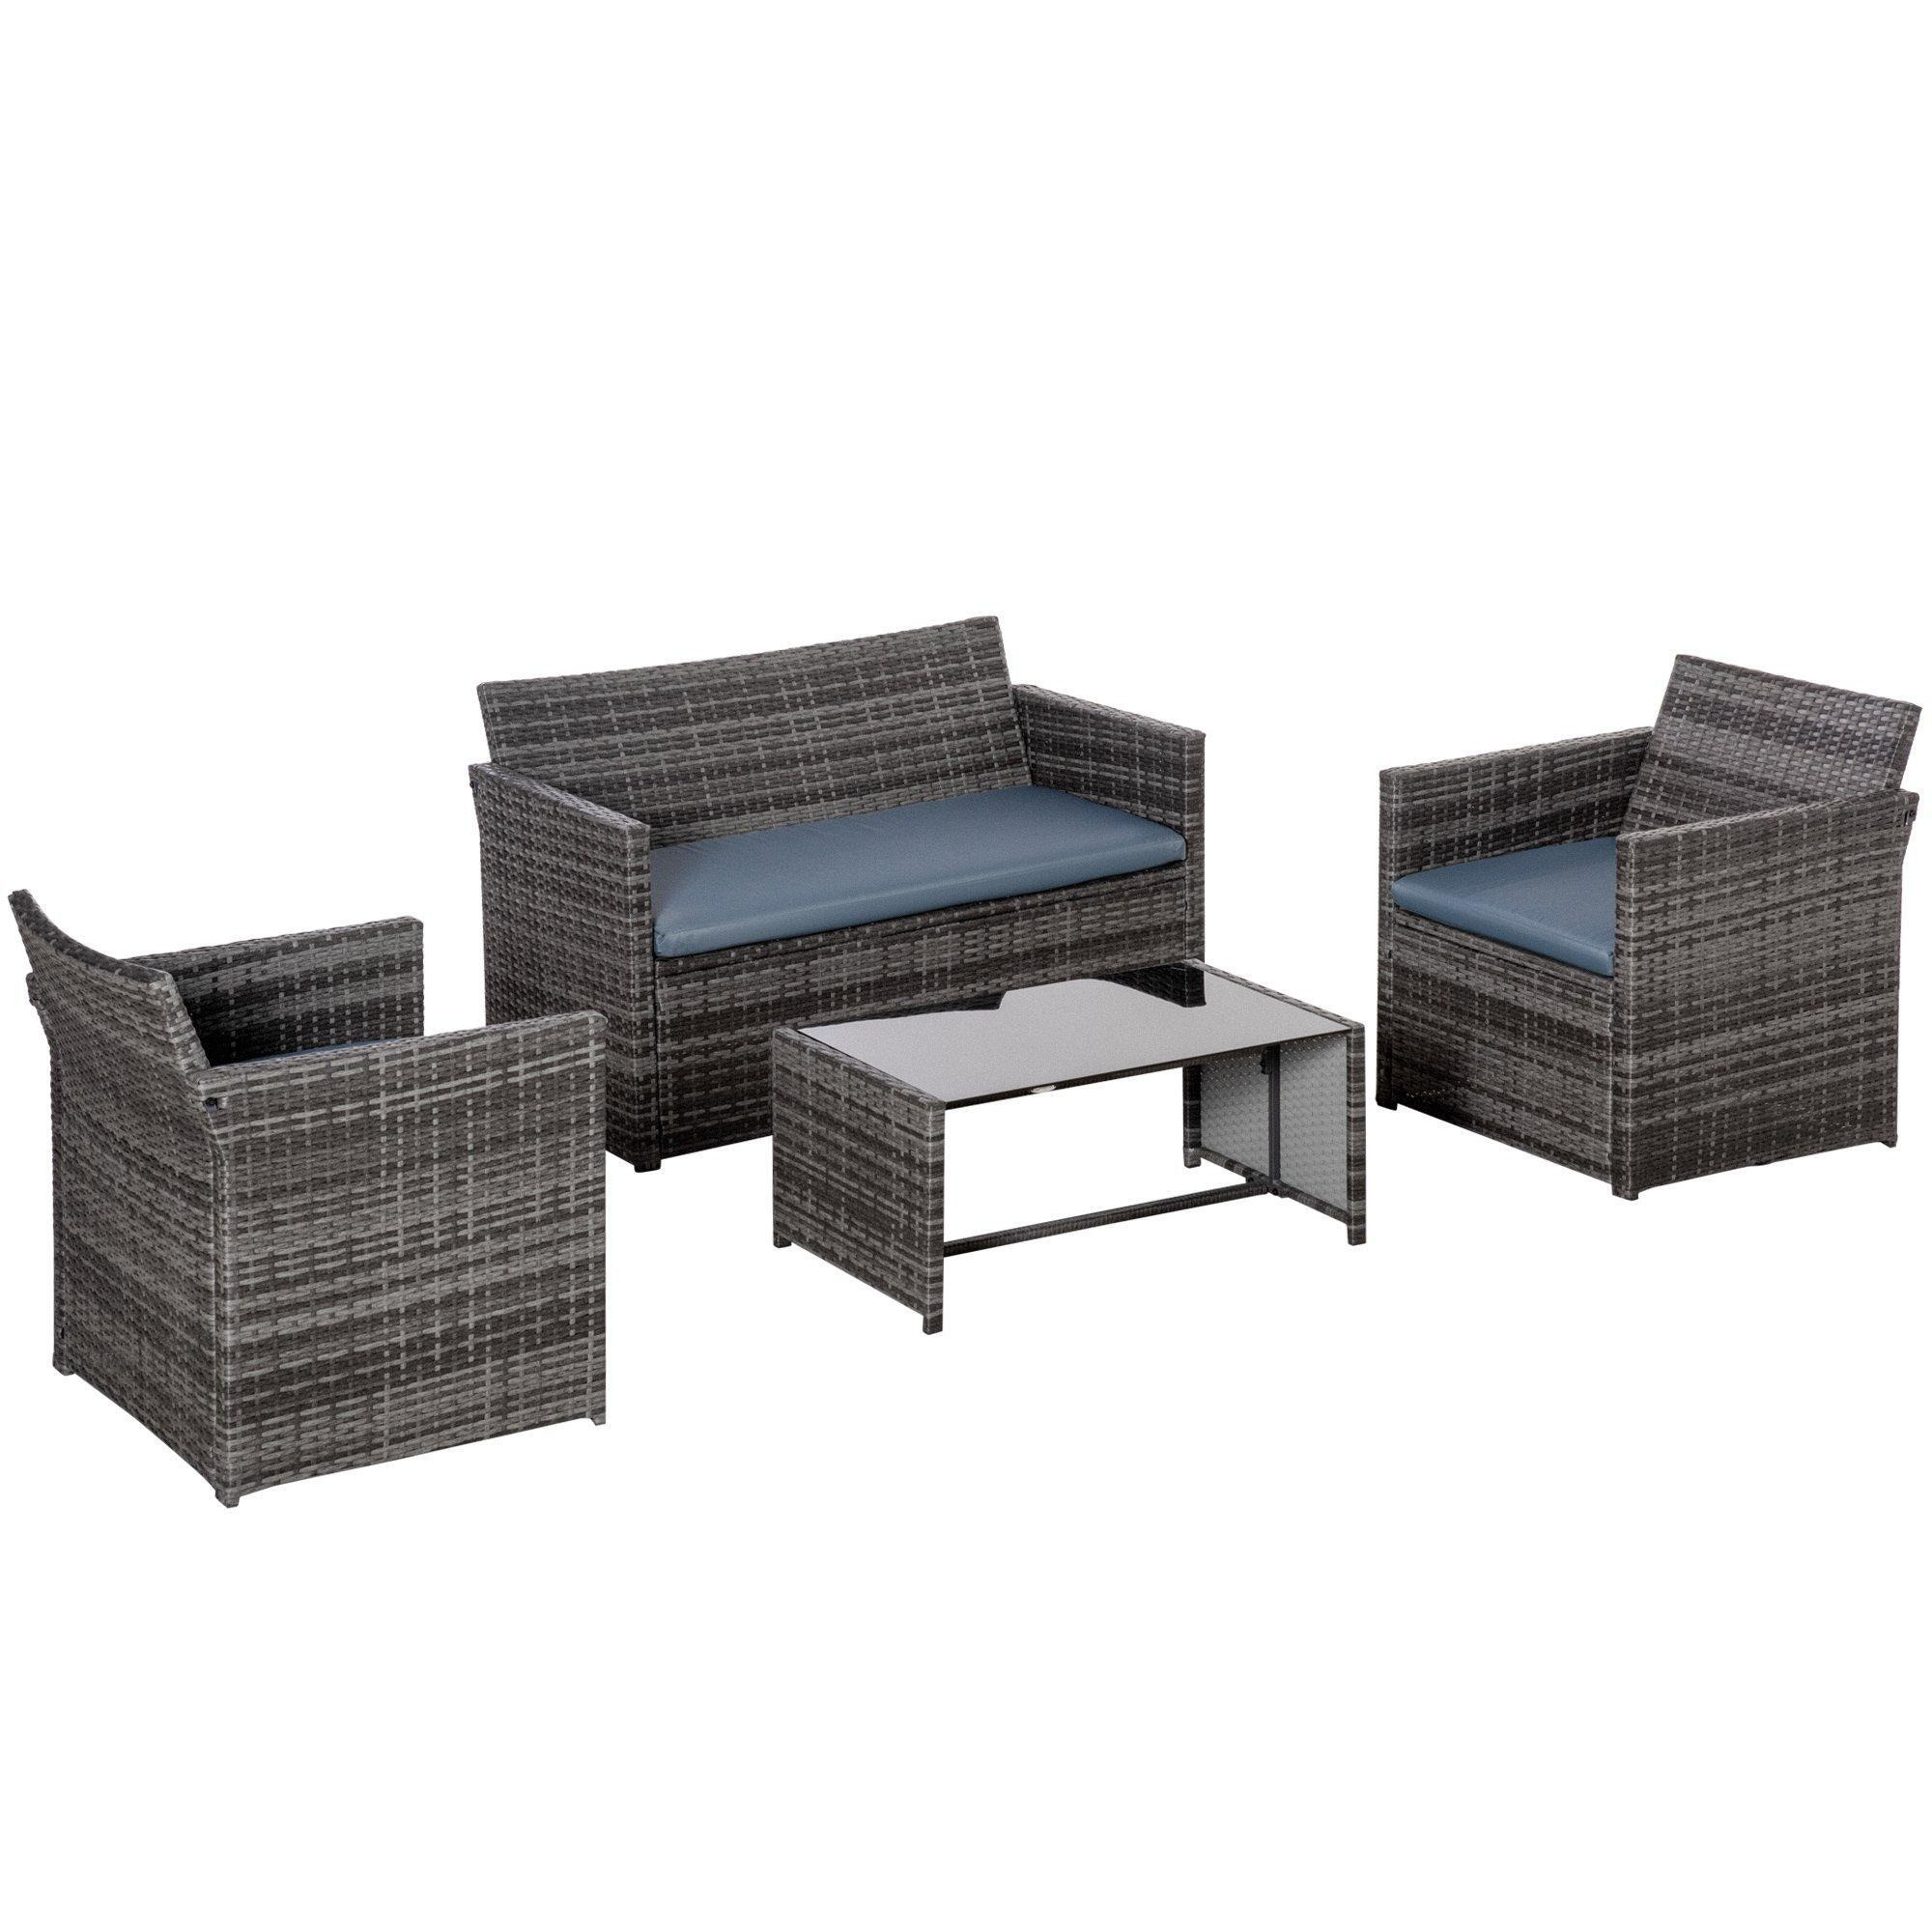 4 pcs Rattan Garden Sofa Set Patio 2-seater Bench Chairs & Coffee Table - image 1